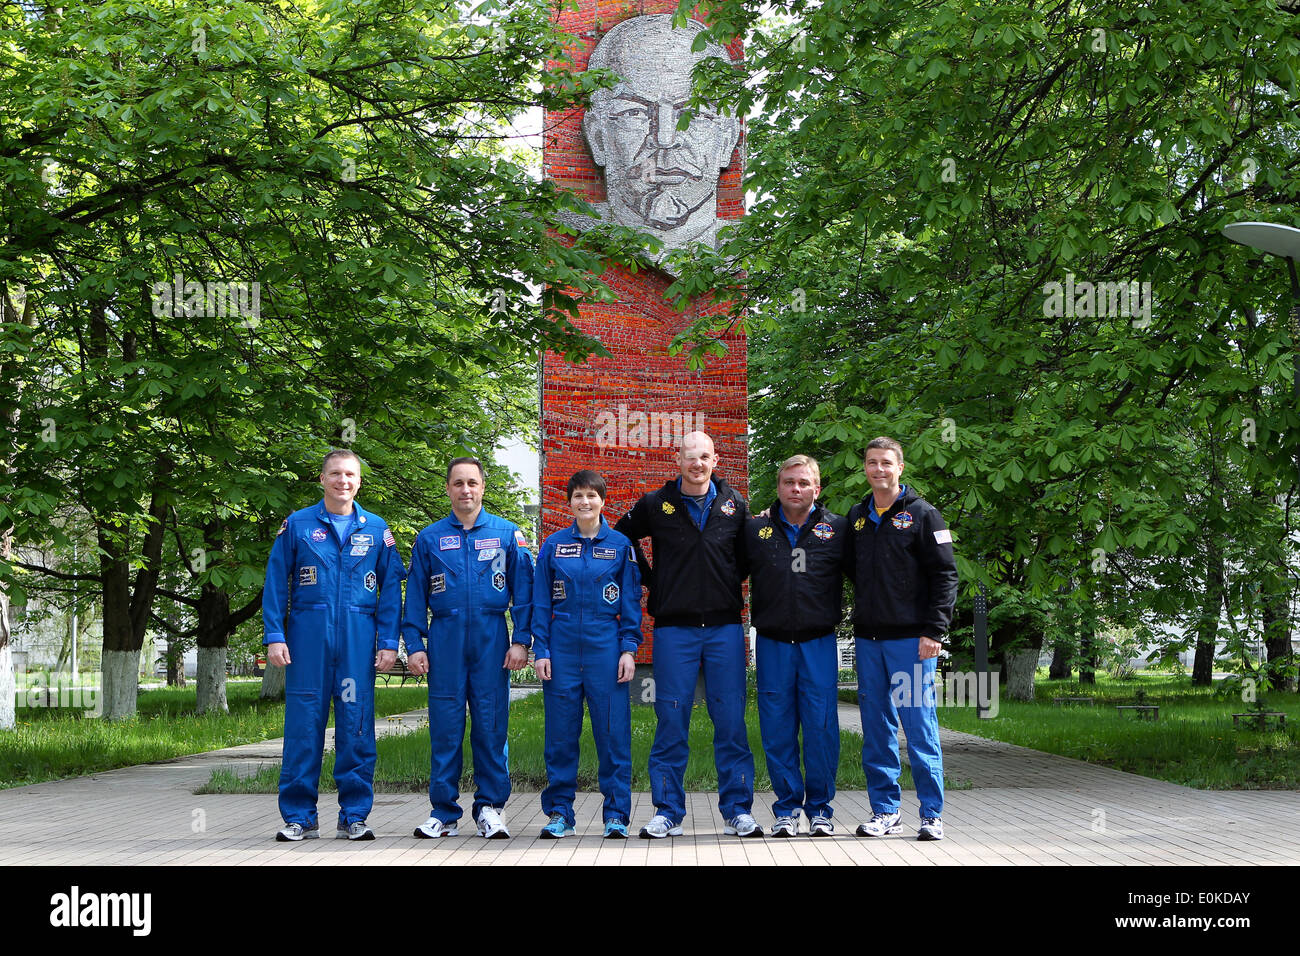 ISS Expedition 40/41 prime and backup crew members pose for pictures prior to their departure for the Baikonur Cosmodrome in Kazakhstan for final pre-launch training in front of a statue of Vladimir Lenin at the Gagarin Cosmonaut Training Center May 15, 2014 in Star City, Russia.  From left to right are backup crew members Terry Virts of NASA, Anton Shkaplerov of the Russian Federal Space Agency and Samantha Cristoforetti of the European Space Agency, and prime crew members  Alexander Gerst of the European Space Agency, Soyuz Commander Max Suraev of Roscosmos Stock Photo